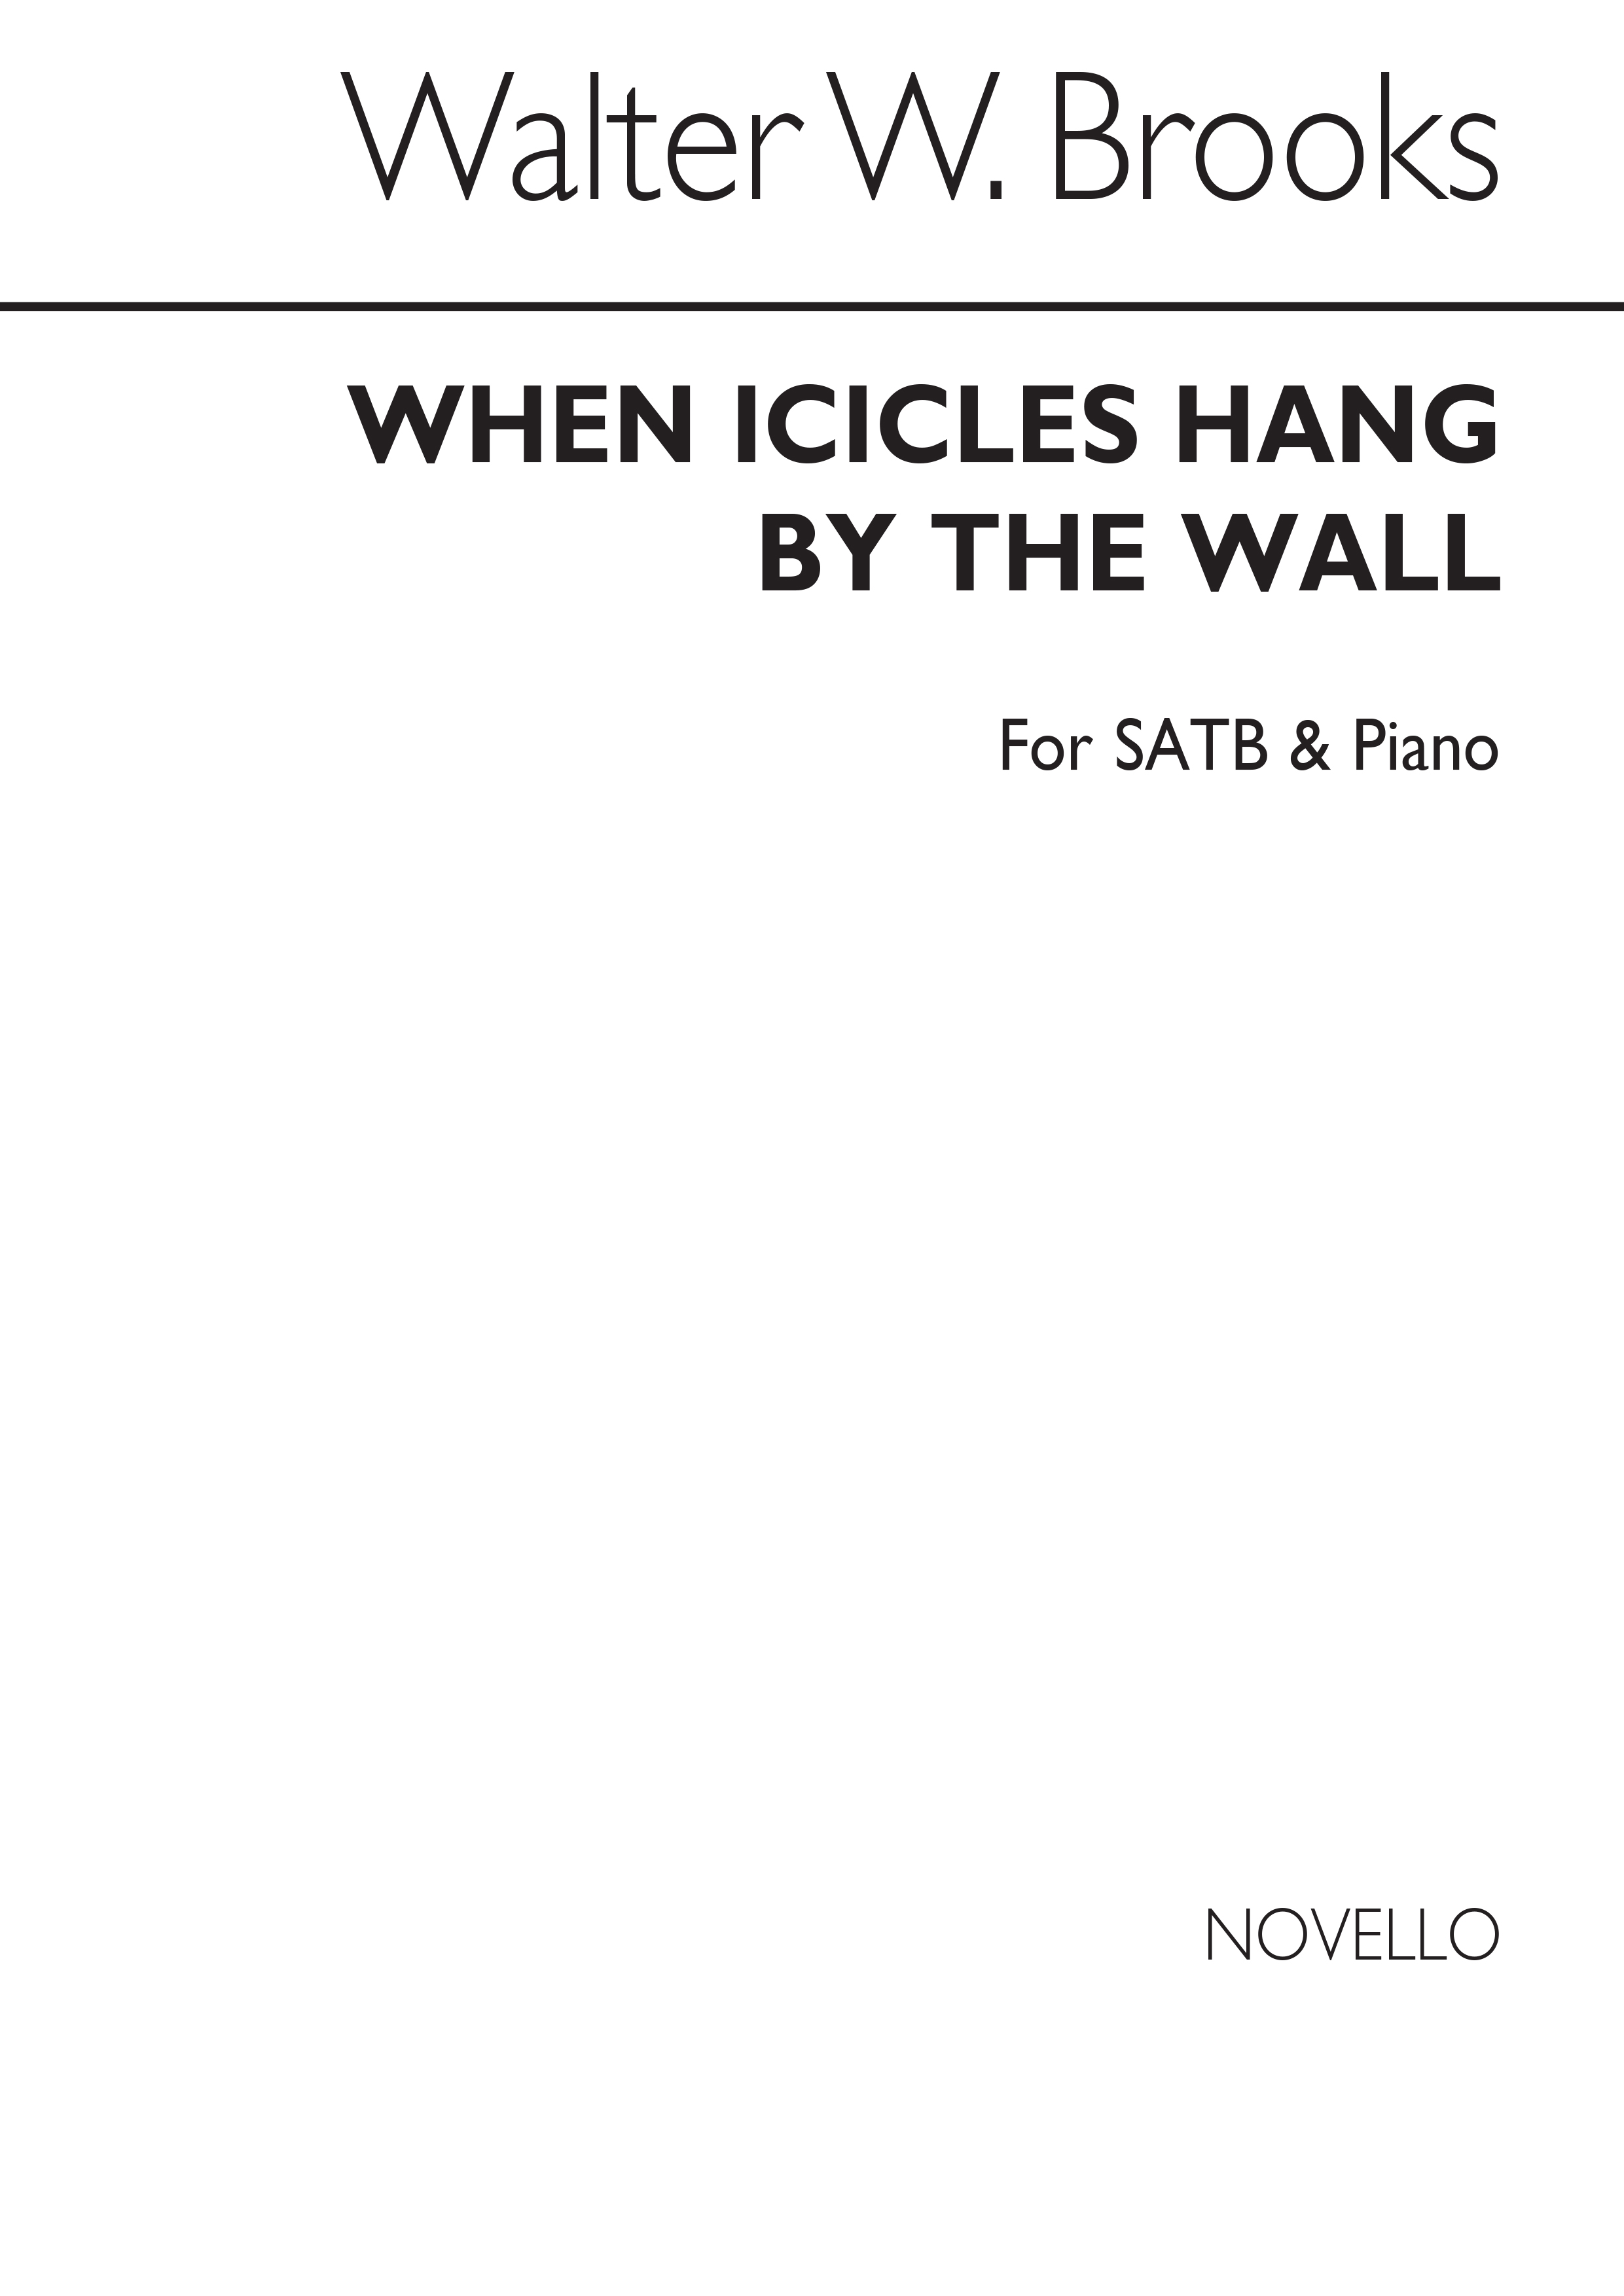 Walter W. Brooks: When Icicles Hang By The Wall: SATB: Vocal Score